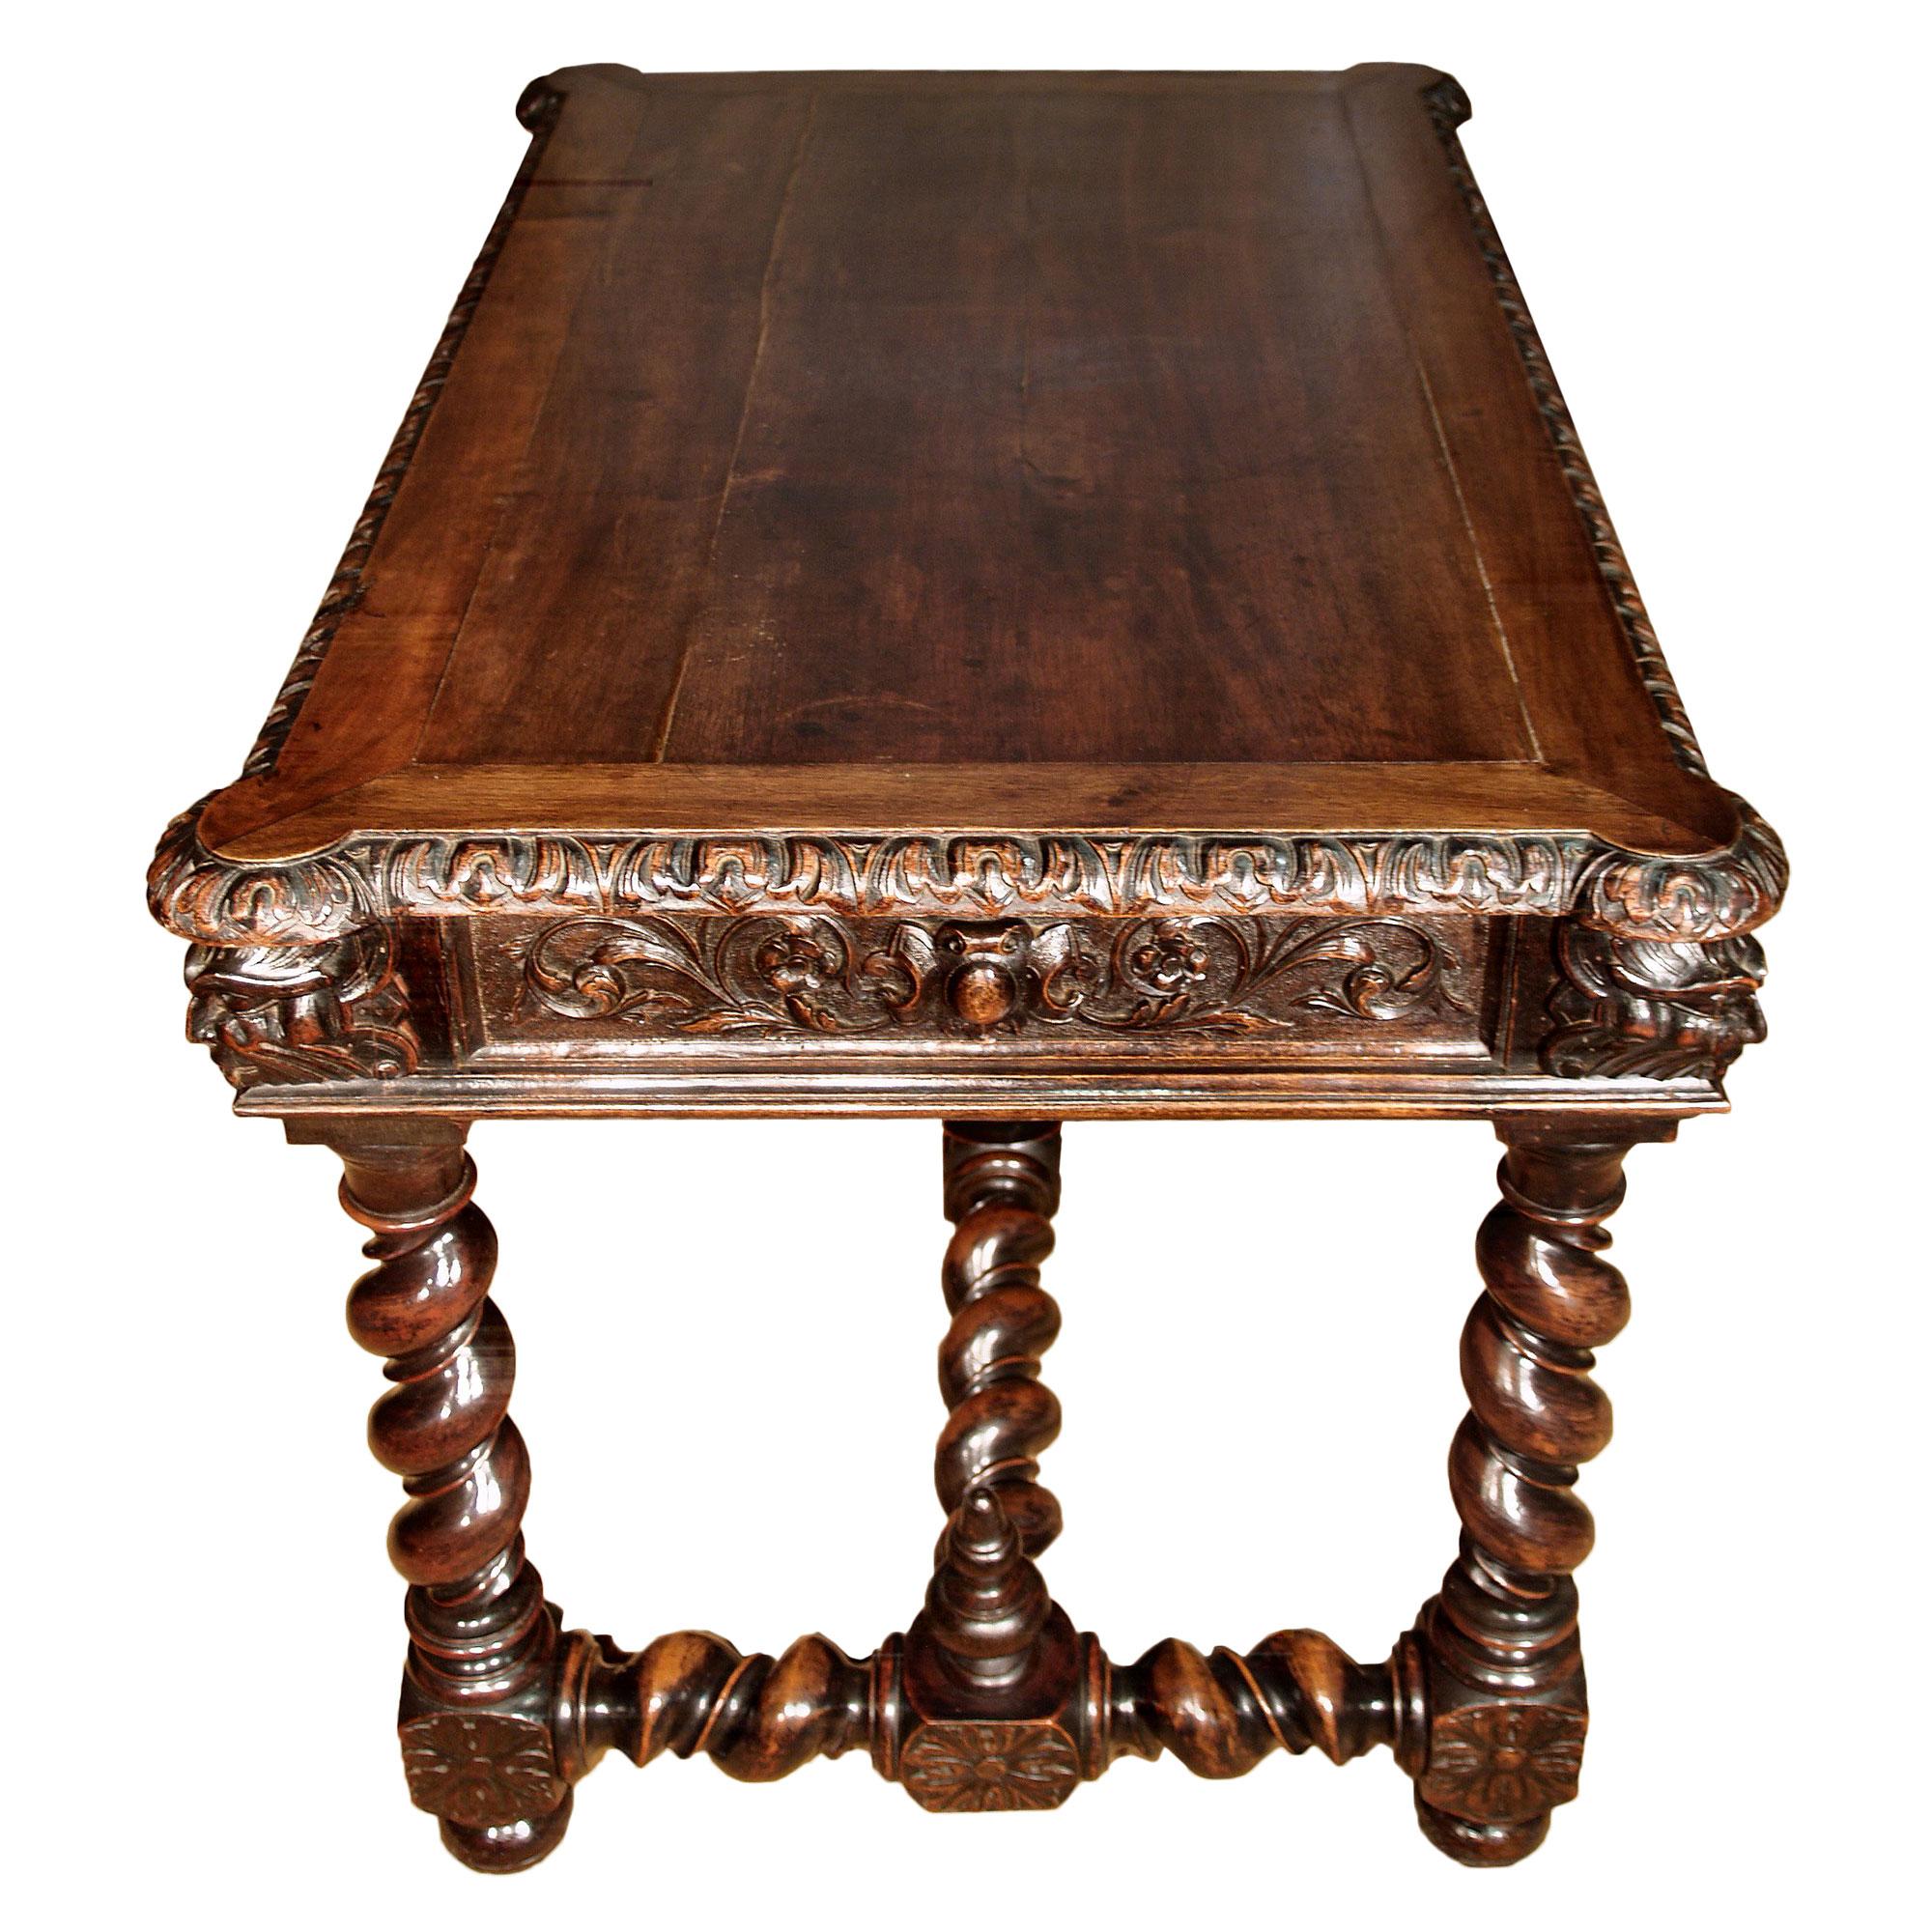 A gorgeous country French 18th century oak table filled with character. The table is raised by four square straight legs which are joined by an 'h' stretcher. The table, all pegged together, has a drawer at one end at the apron. The top has an